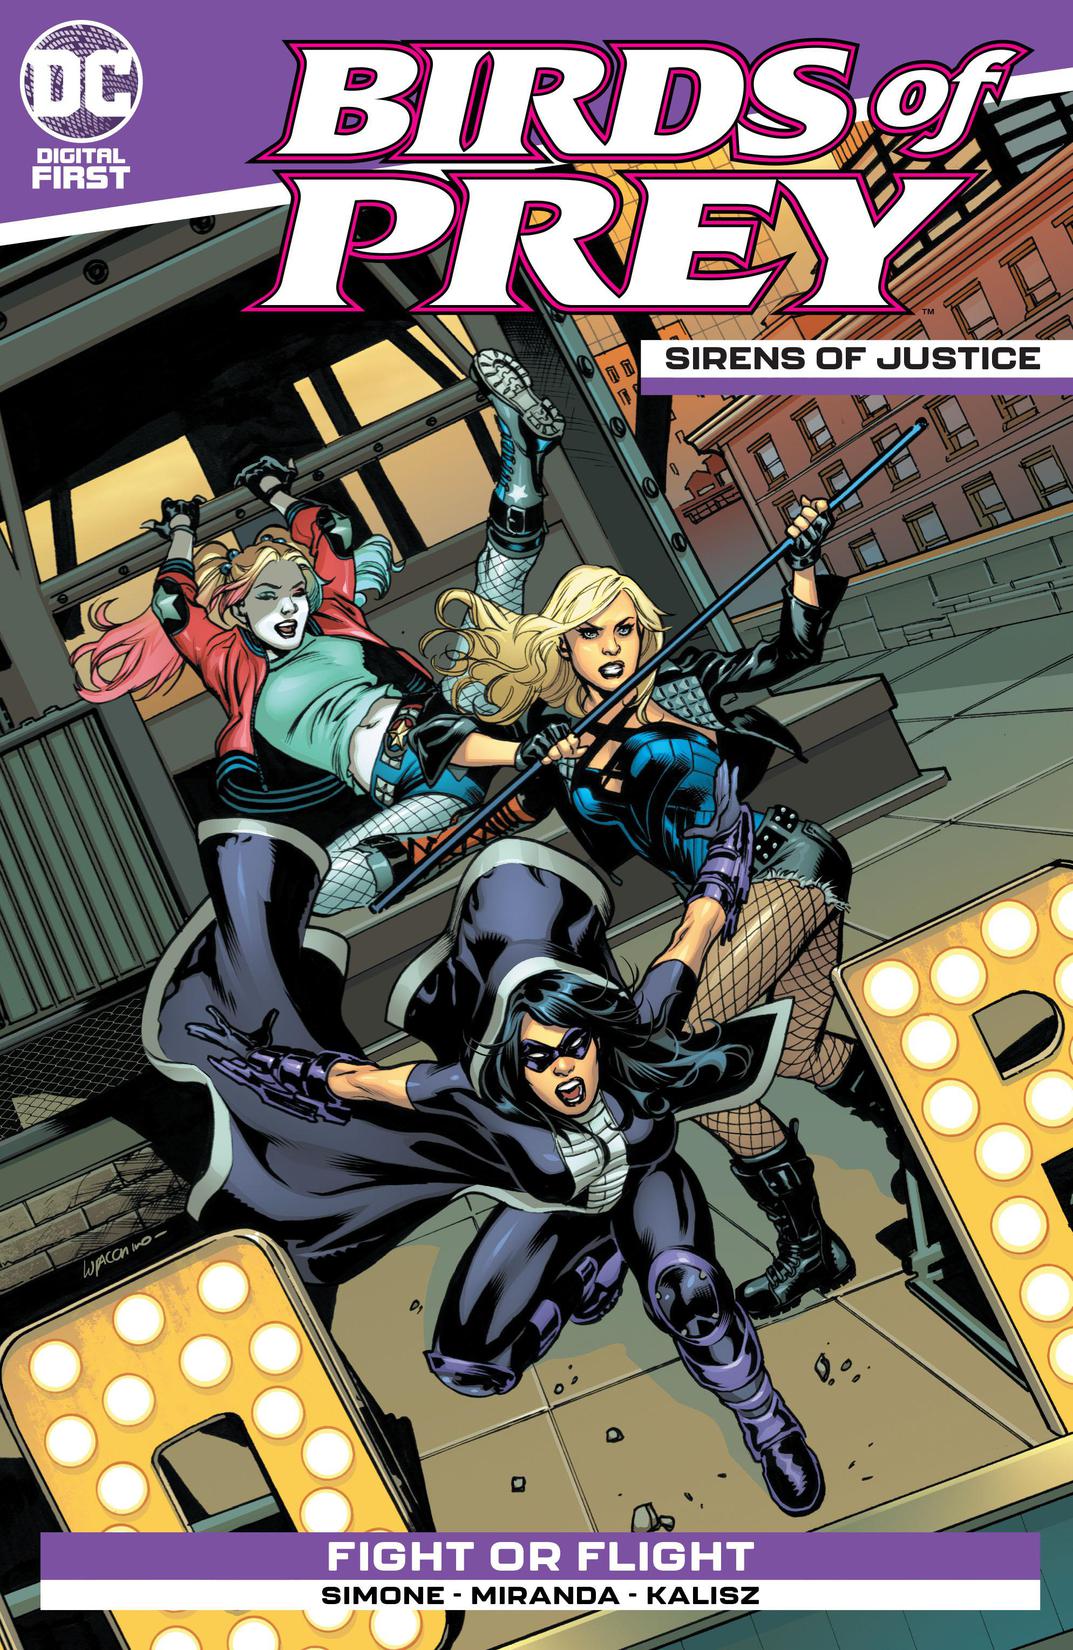 Birds of Prey: Sirens of Justice #1 preview images